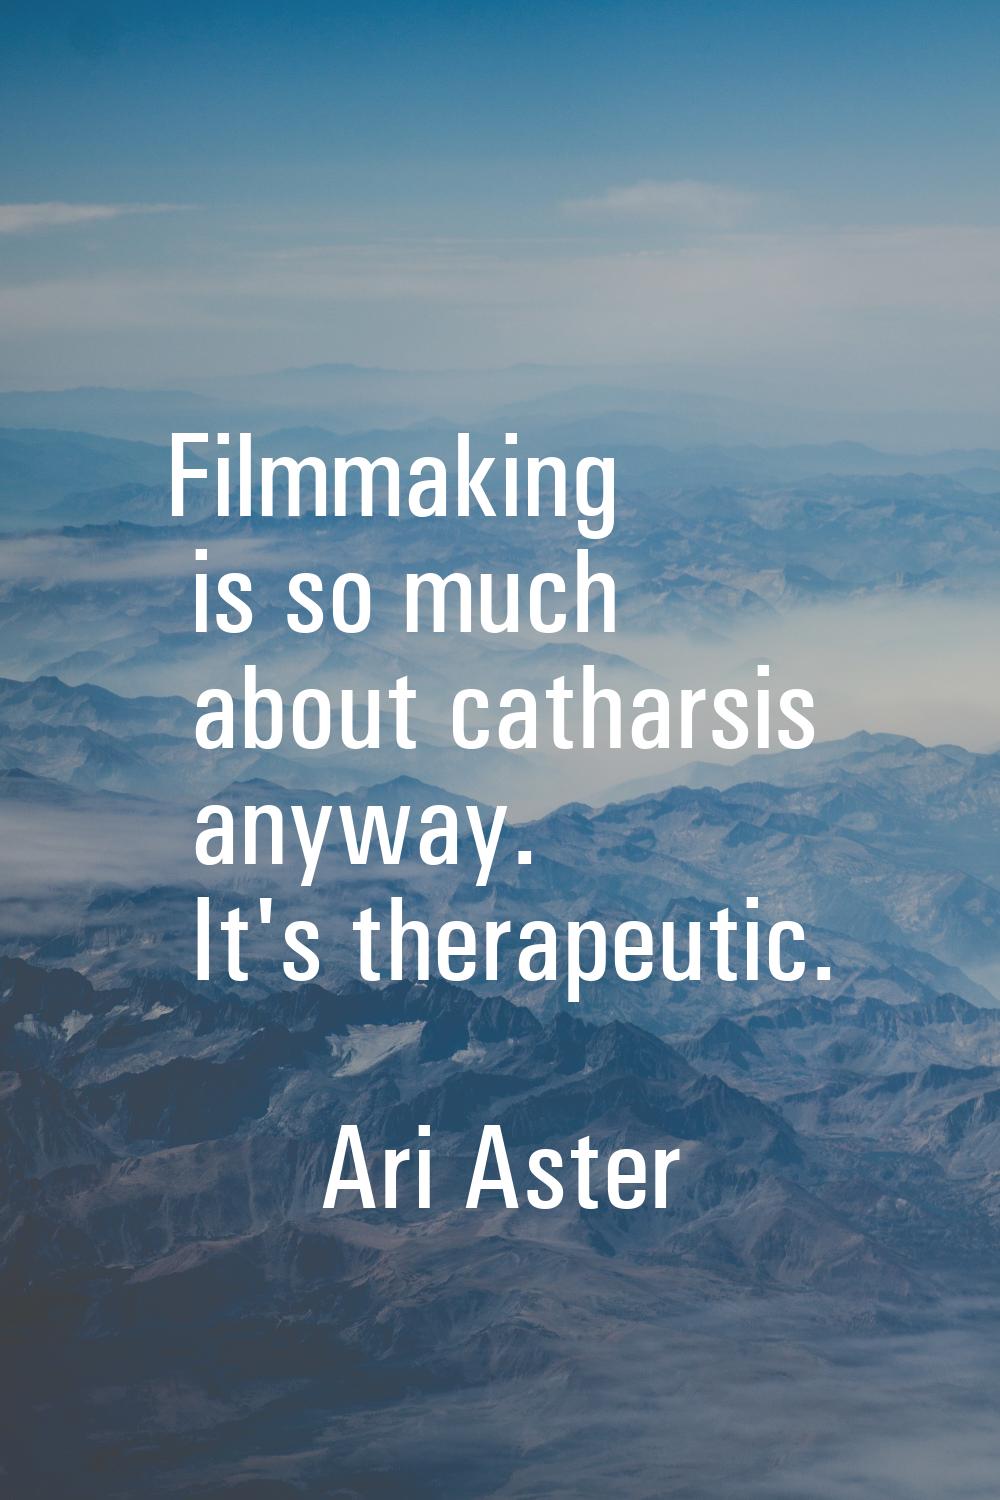 Filmmaking is so much about catharsis anyway. It's therapeutic.